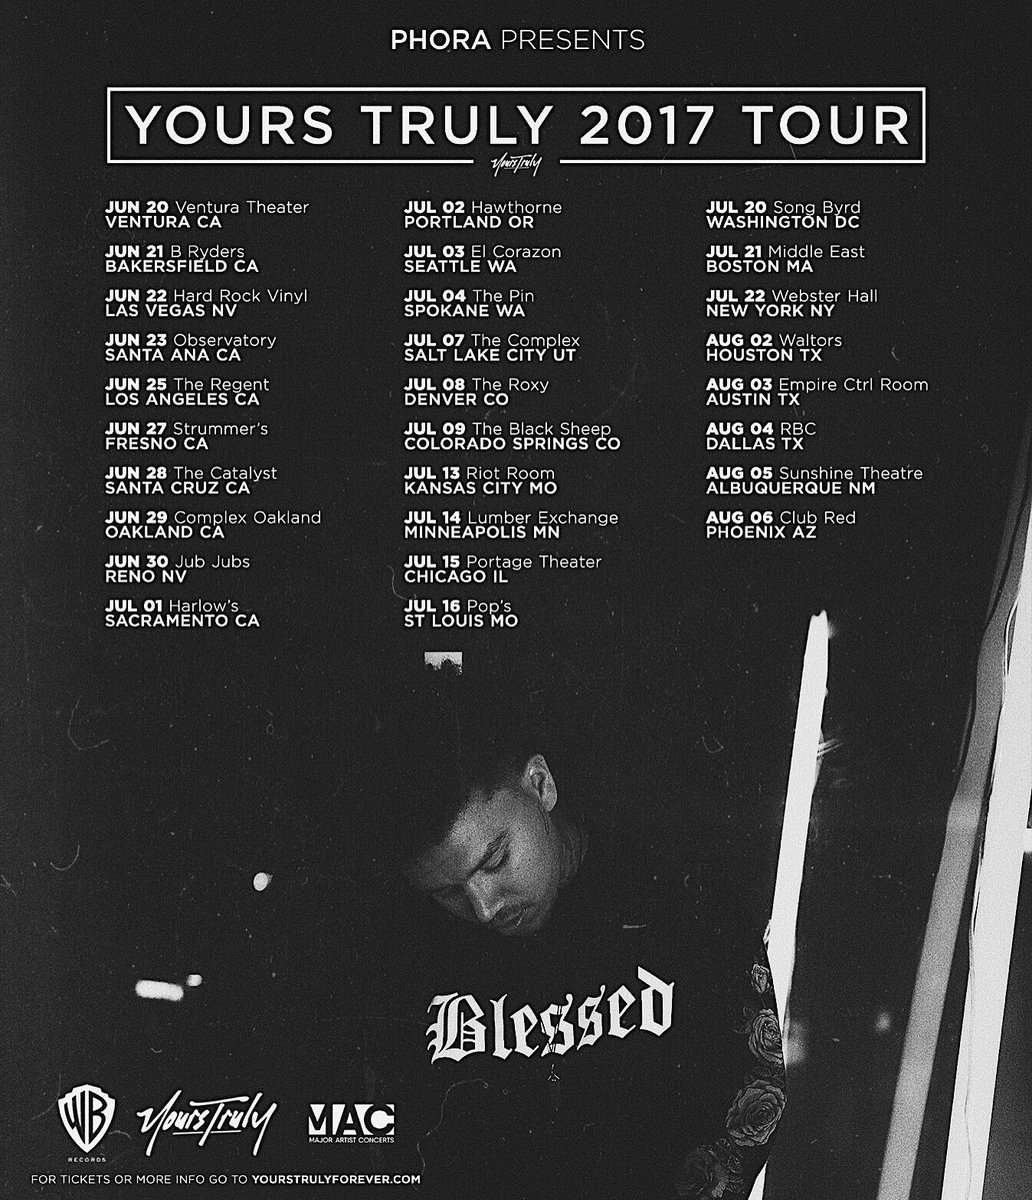 Phora 'Yours Truly 2017 Tour' dates. Photo by: Phora / Twitter